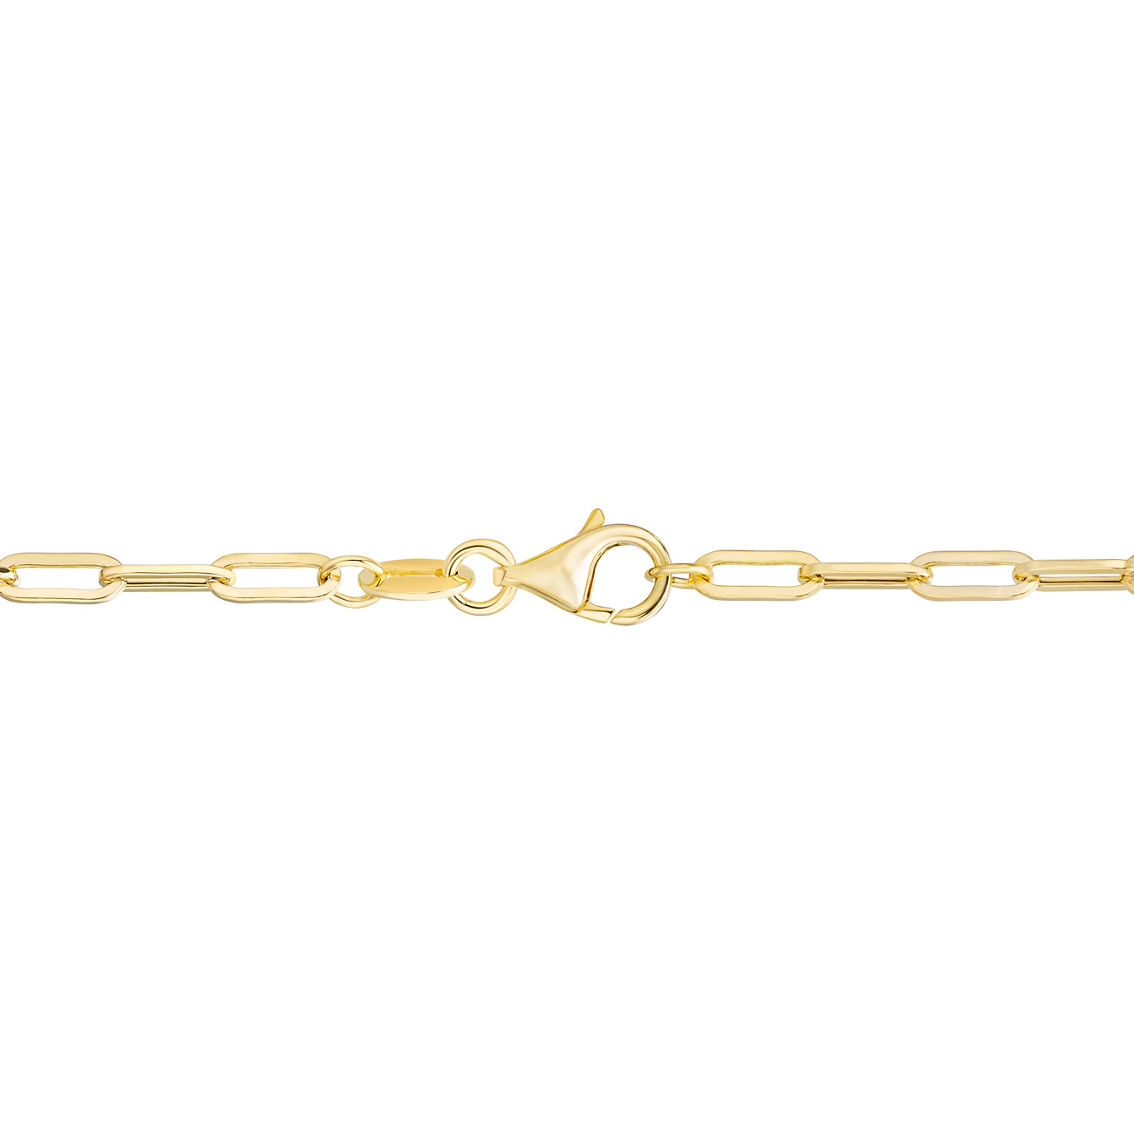 14K Yellow Gold 12 x 12 x 6mm Puffed Heart Paperclip Necklace, 18 in. - Image 2 of 3